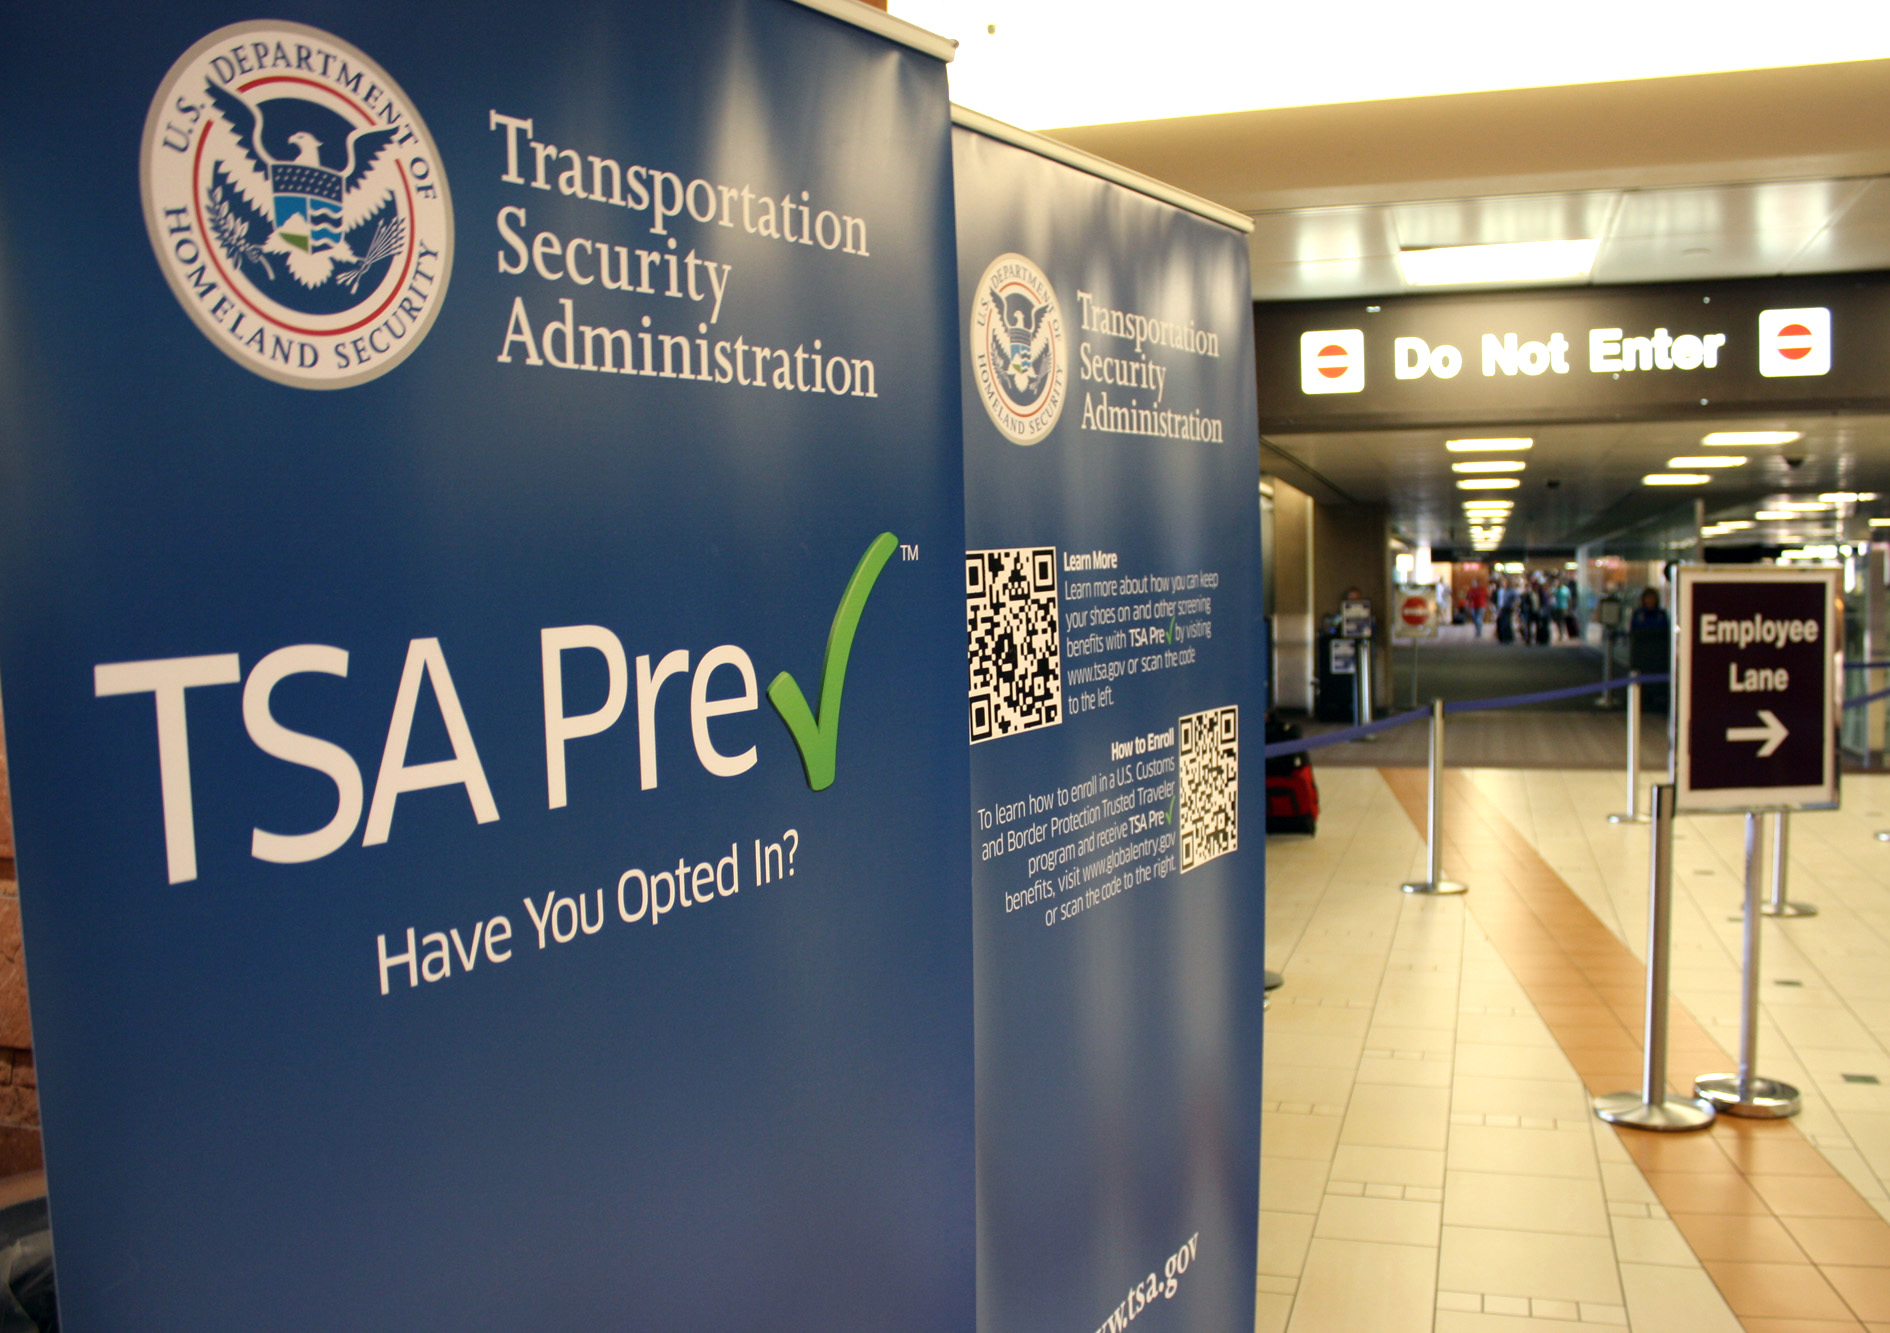 Tsa Precheck Expands Enrollment Services In Indianapolis Indianapolis Business Journal 